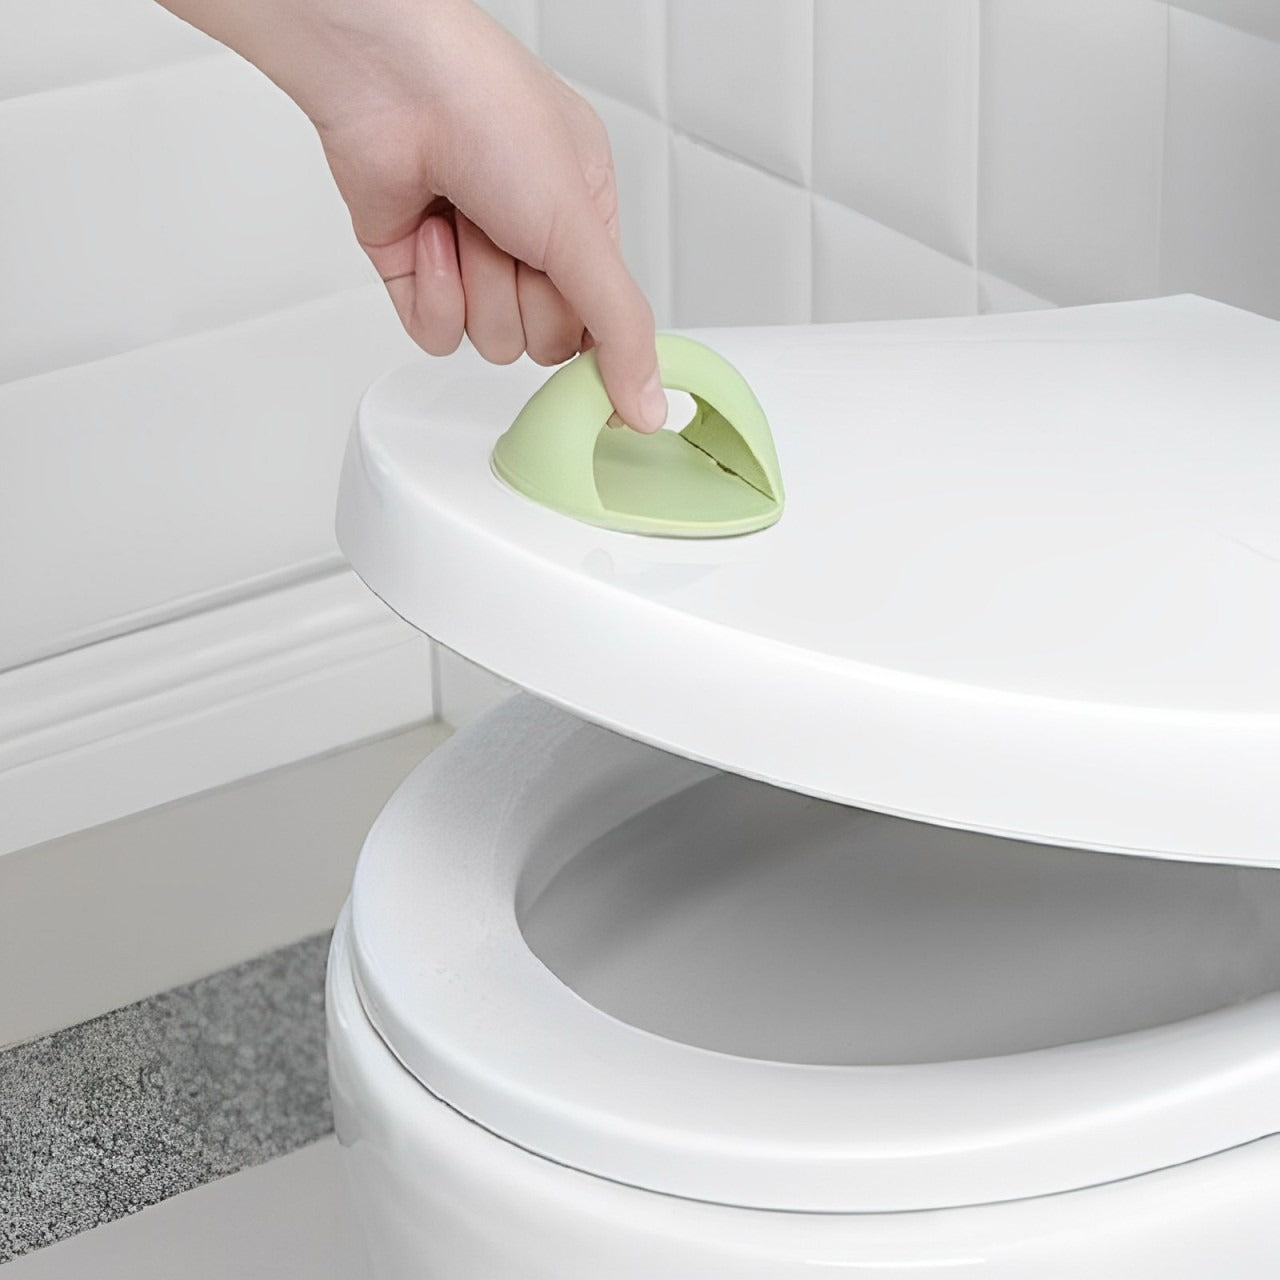 A Person is Opening Toilet Lid  Using Adhesive Toilet Seat Lifter.